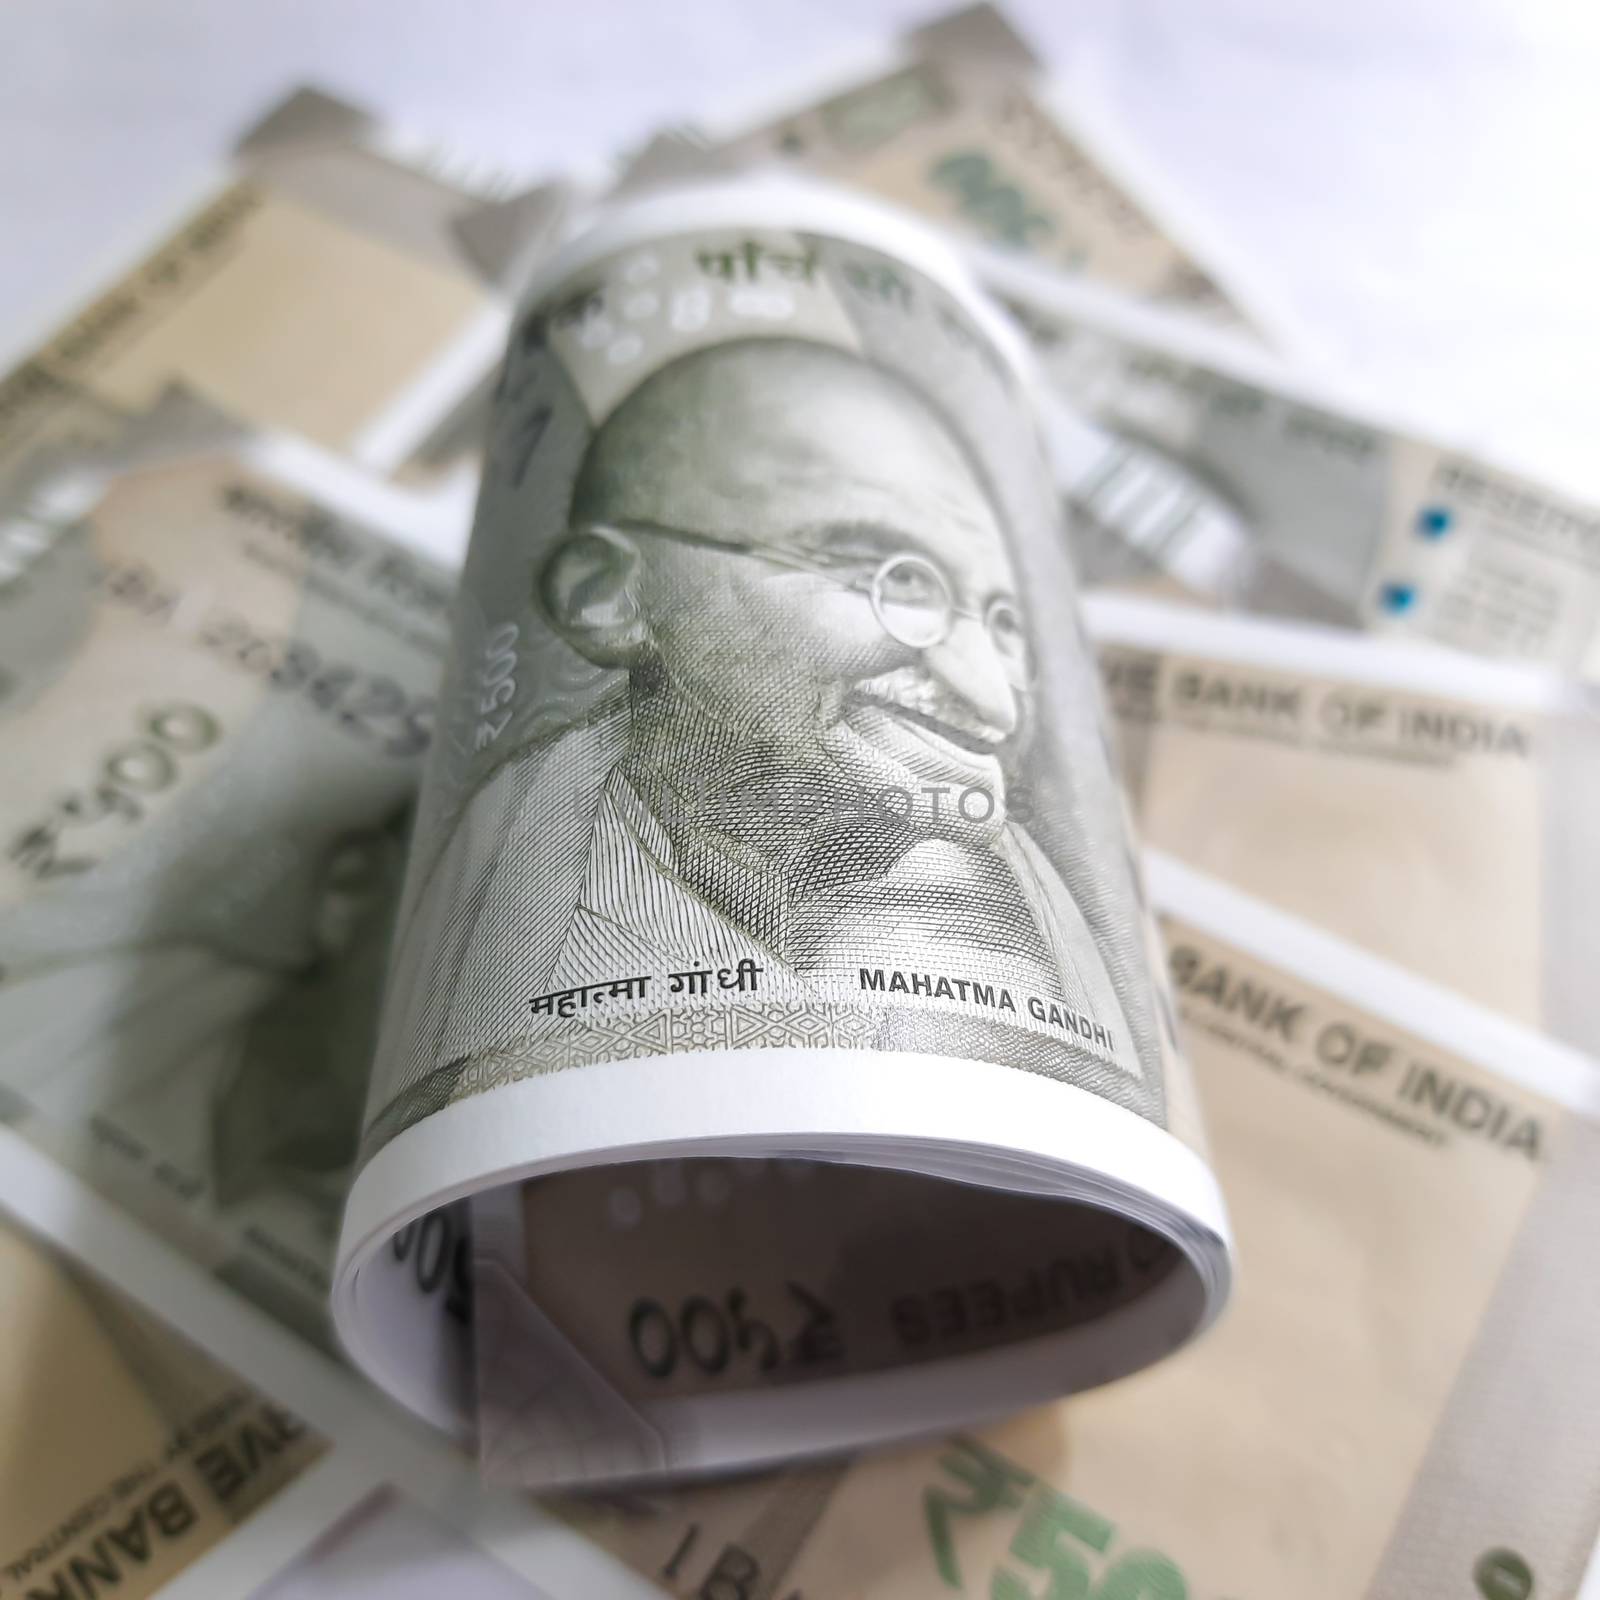 indian new currency 500 rupees with rubber band and took close view of gandhi face